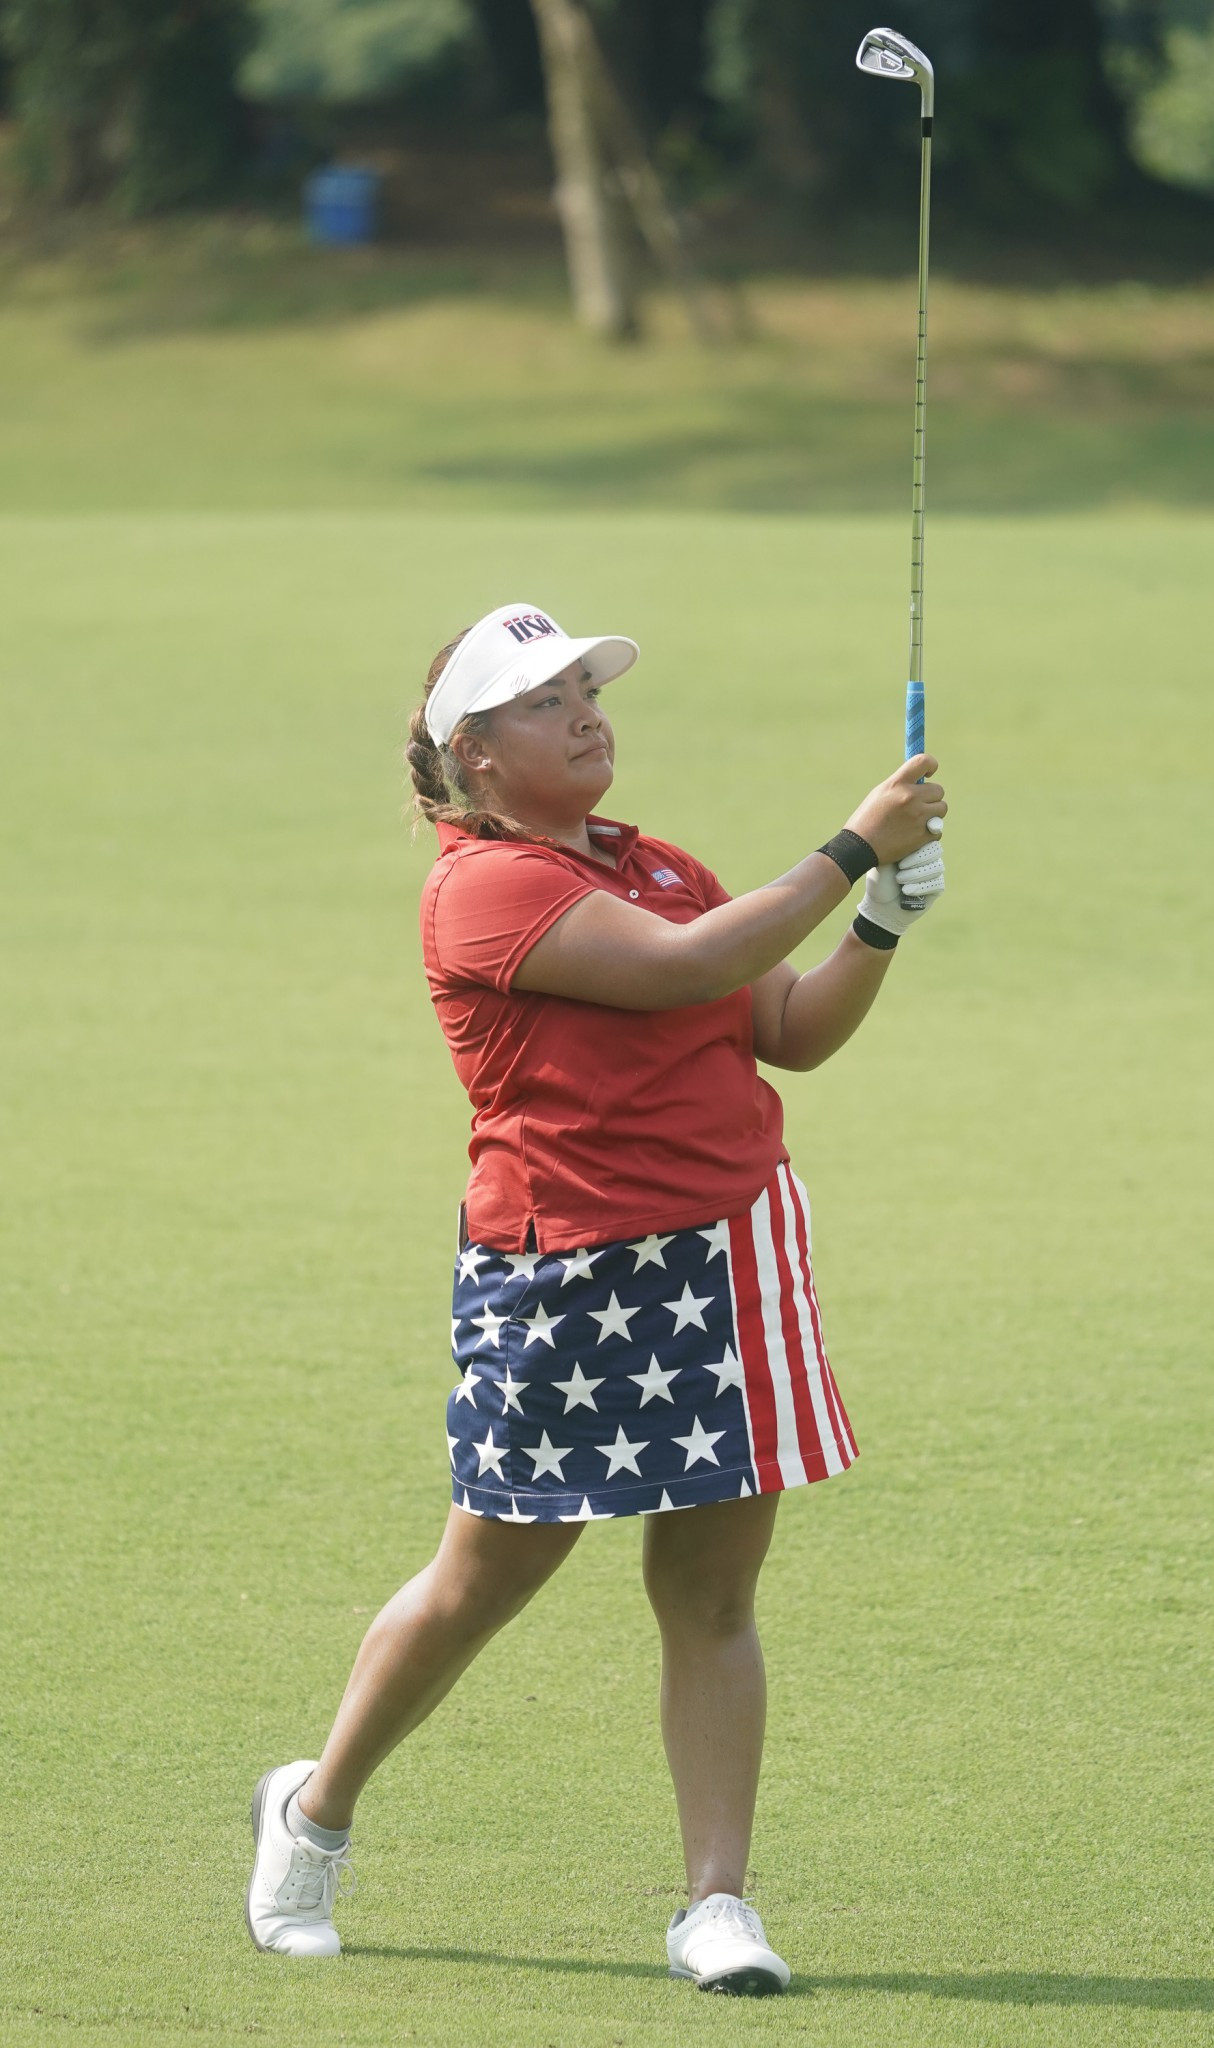 Mariel Lancy Galdiano of the United States took the women’s golf title ©Taipei 2017